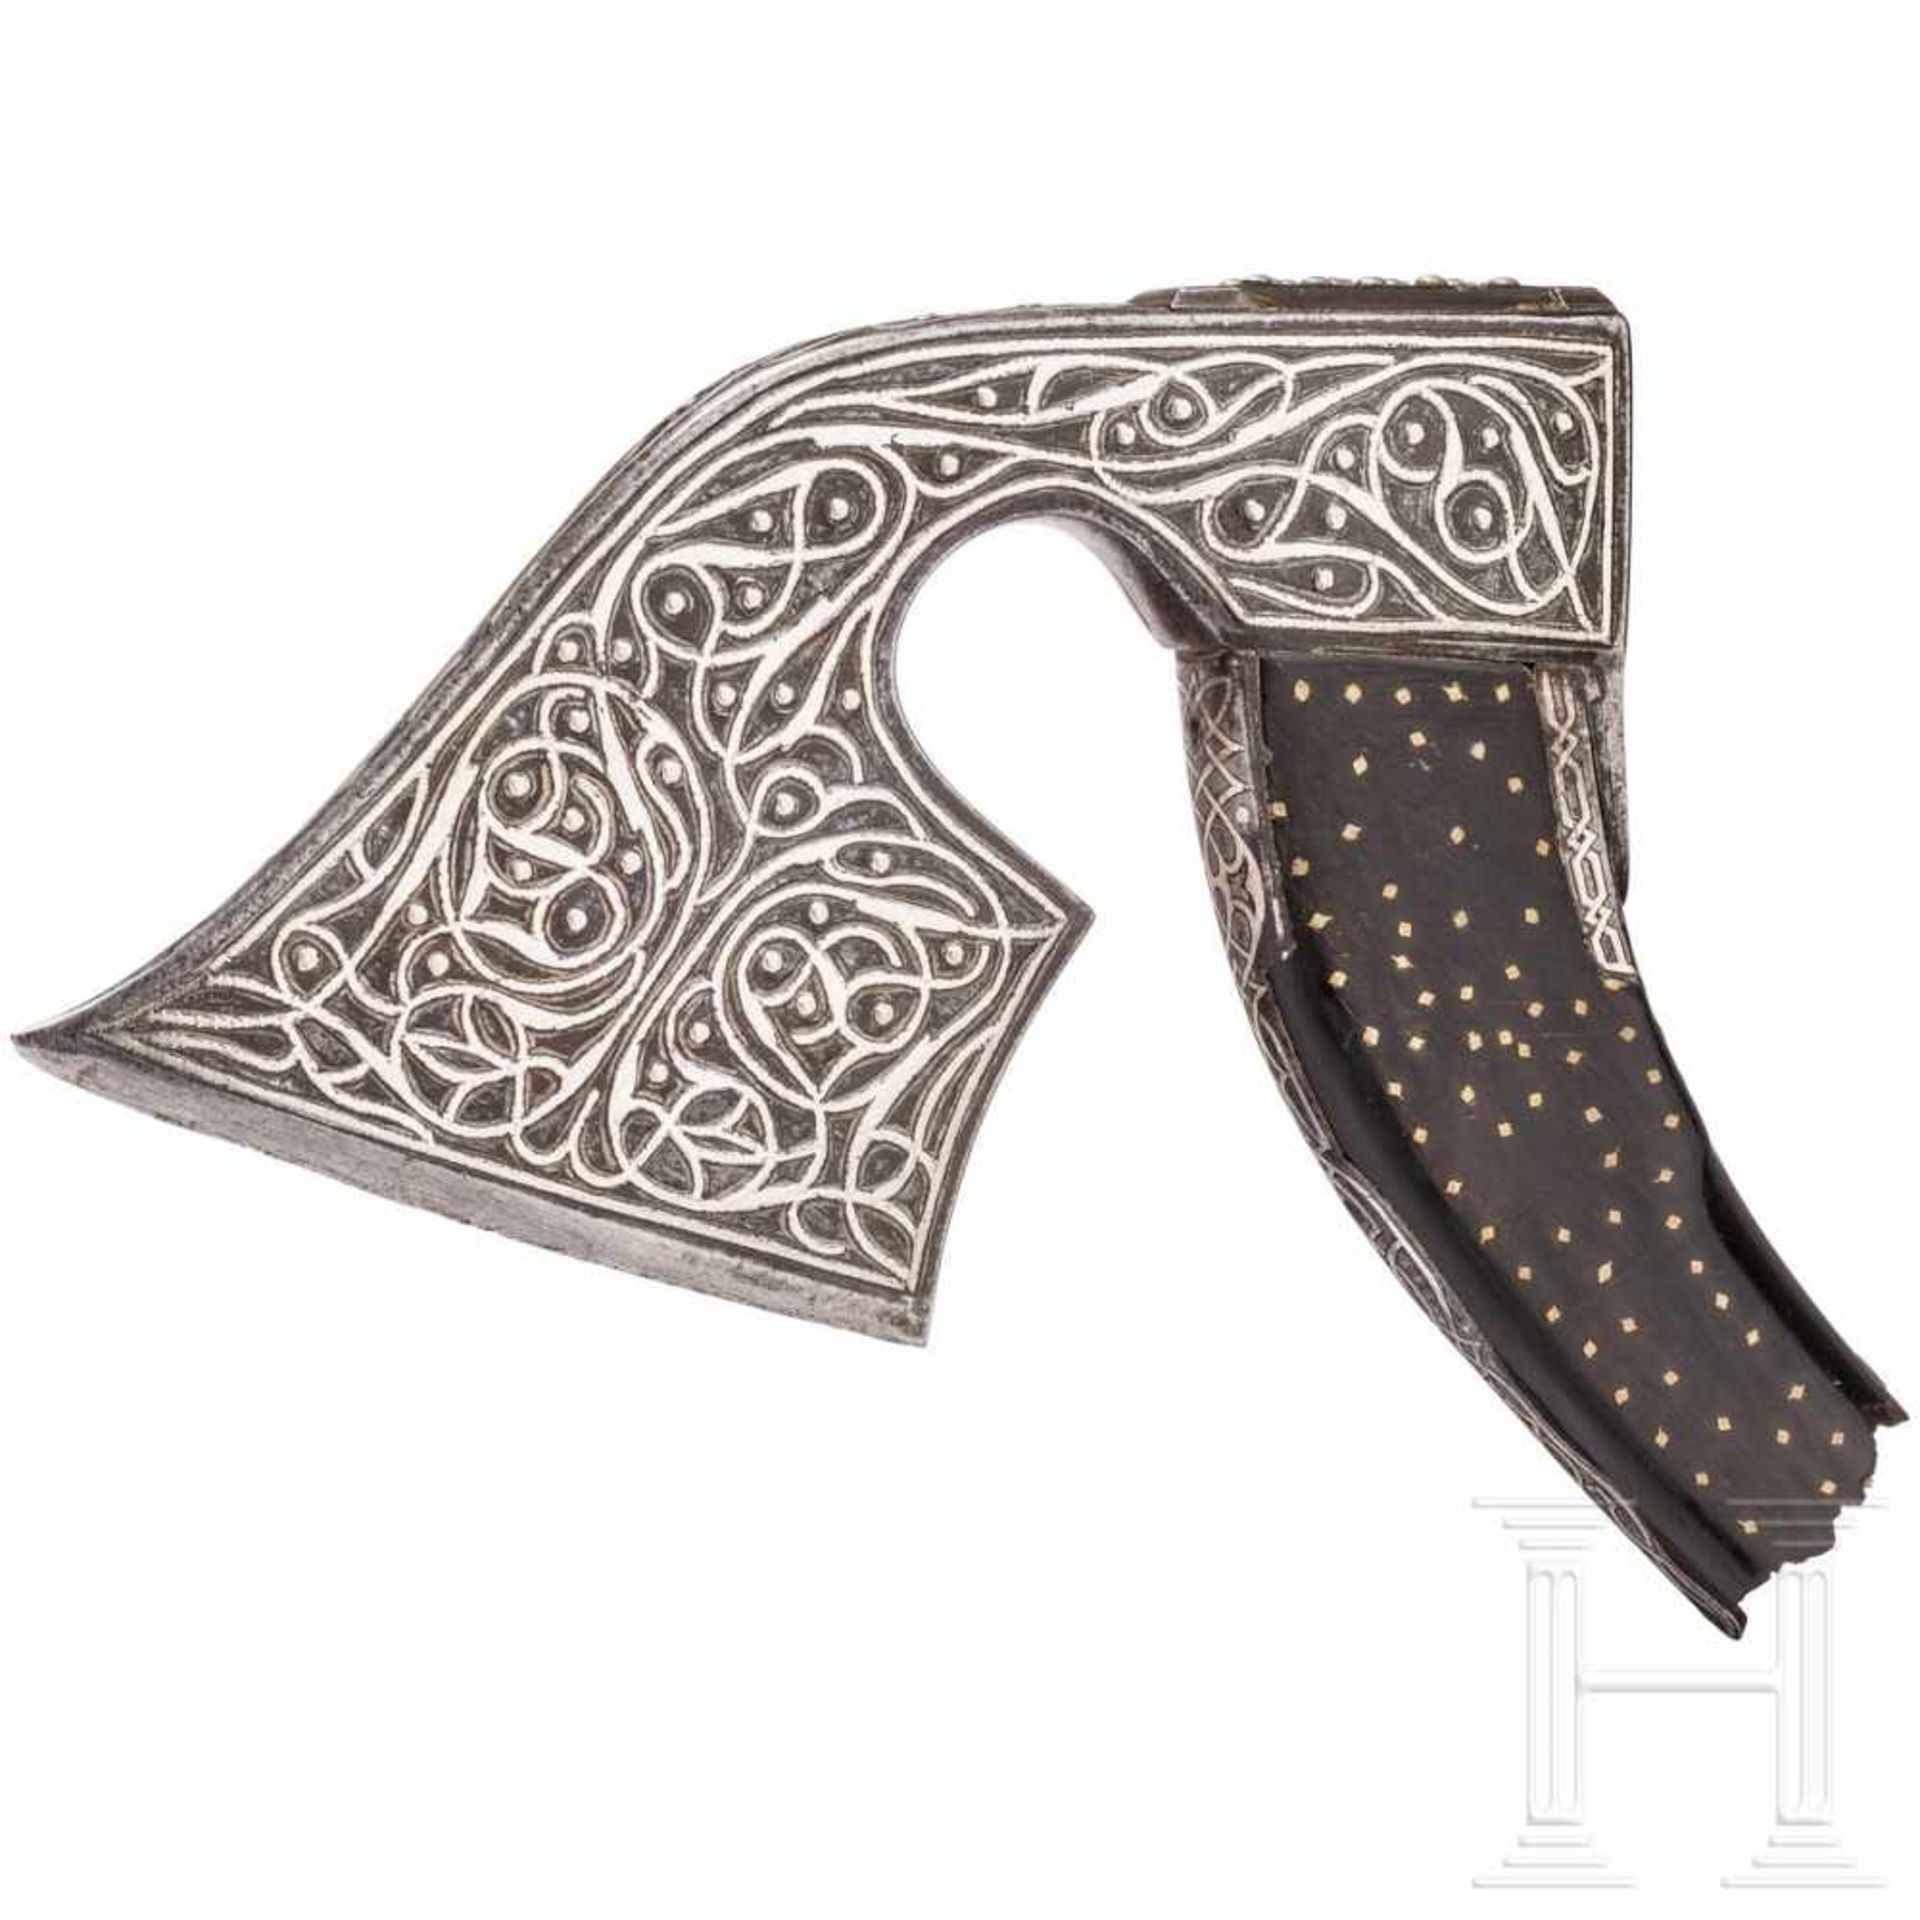 A splendid Ottoman axe head, 18th centuryLight, strongly curved axe head chiselled and inlaid in